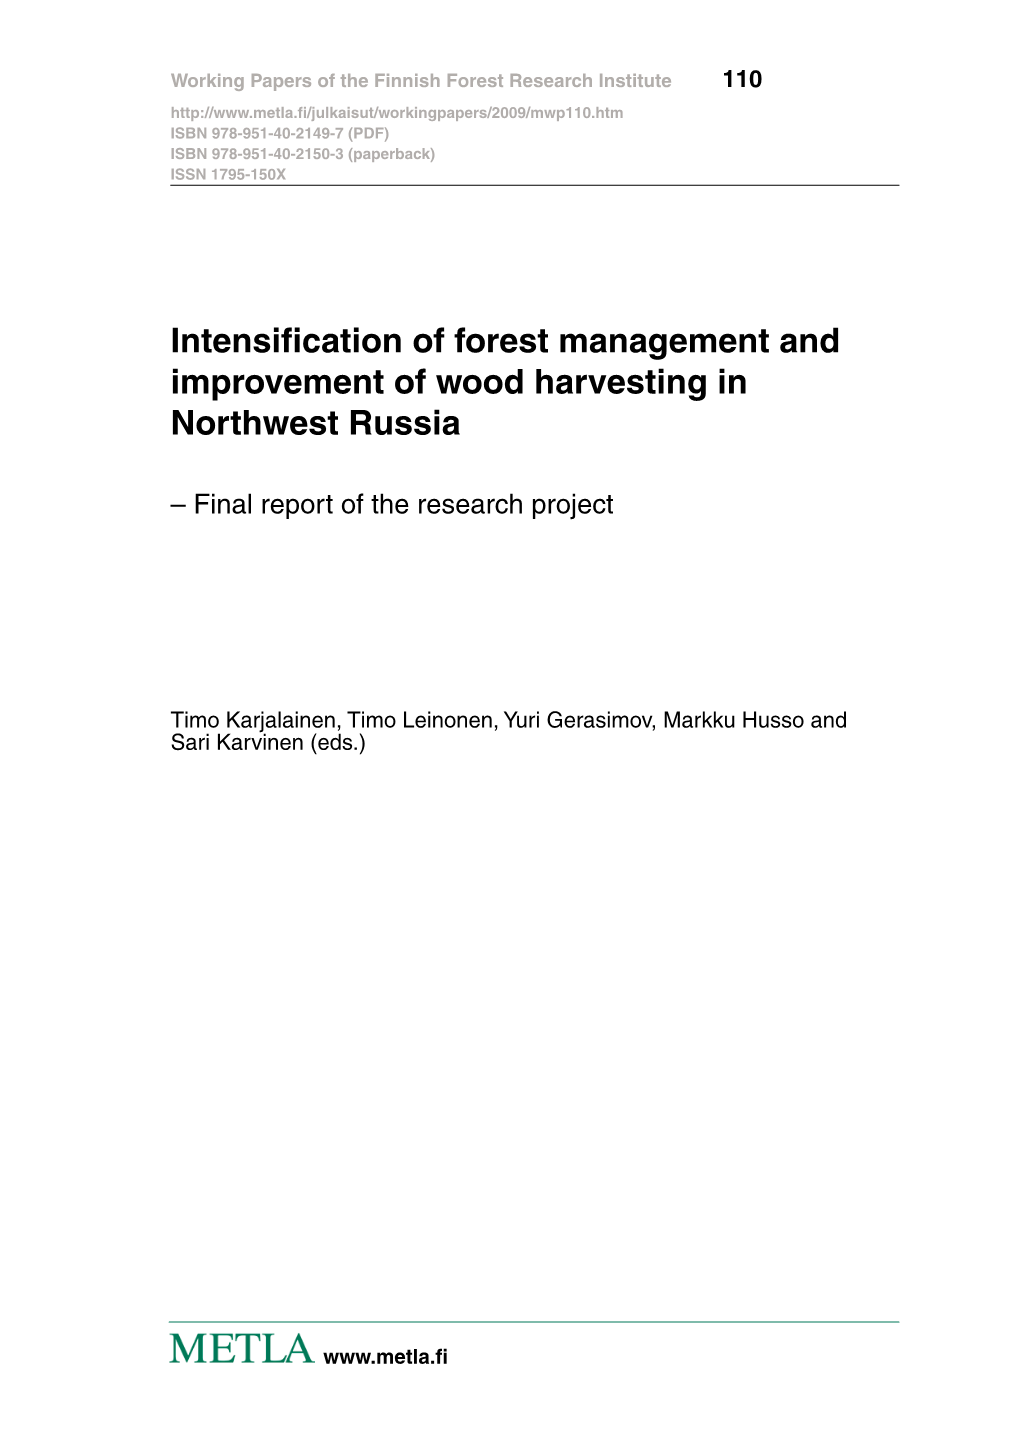 Intensification of Forest Management and Improvement of Wood Harvesting in Northwest Russia